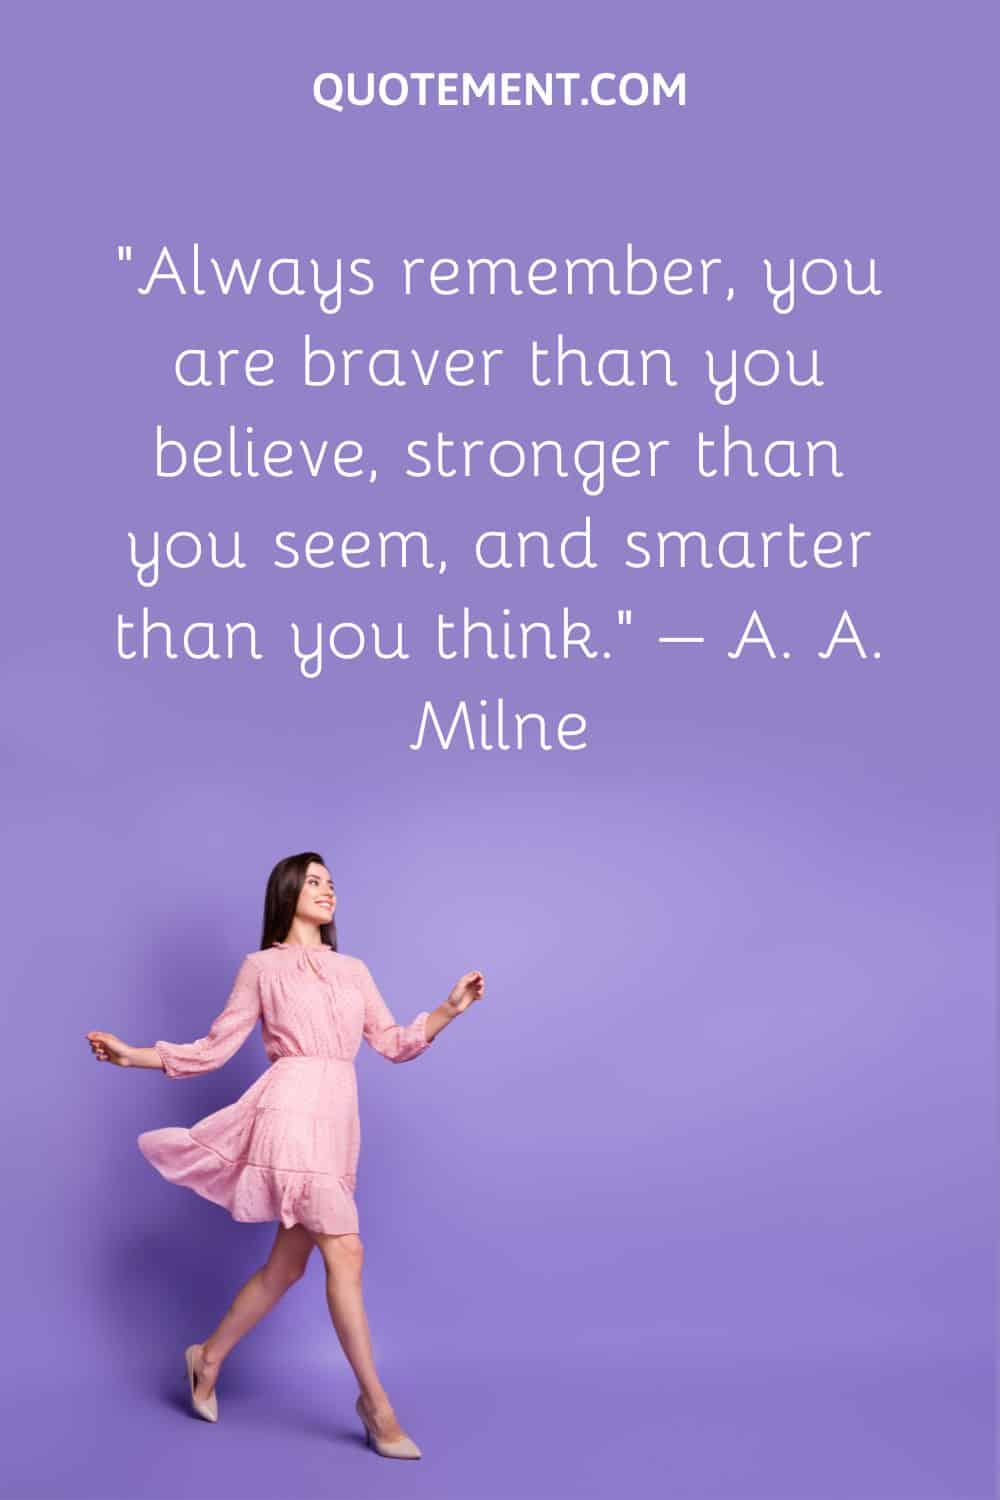 Always remember, you are braver than you believe, stronger than you seem, and smarter than you think.